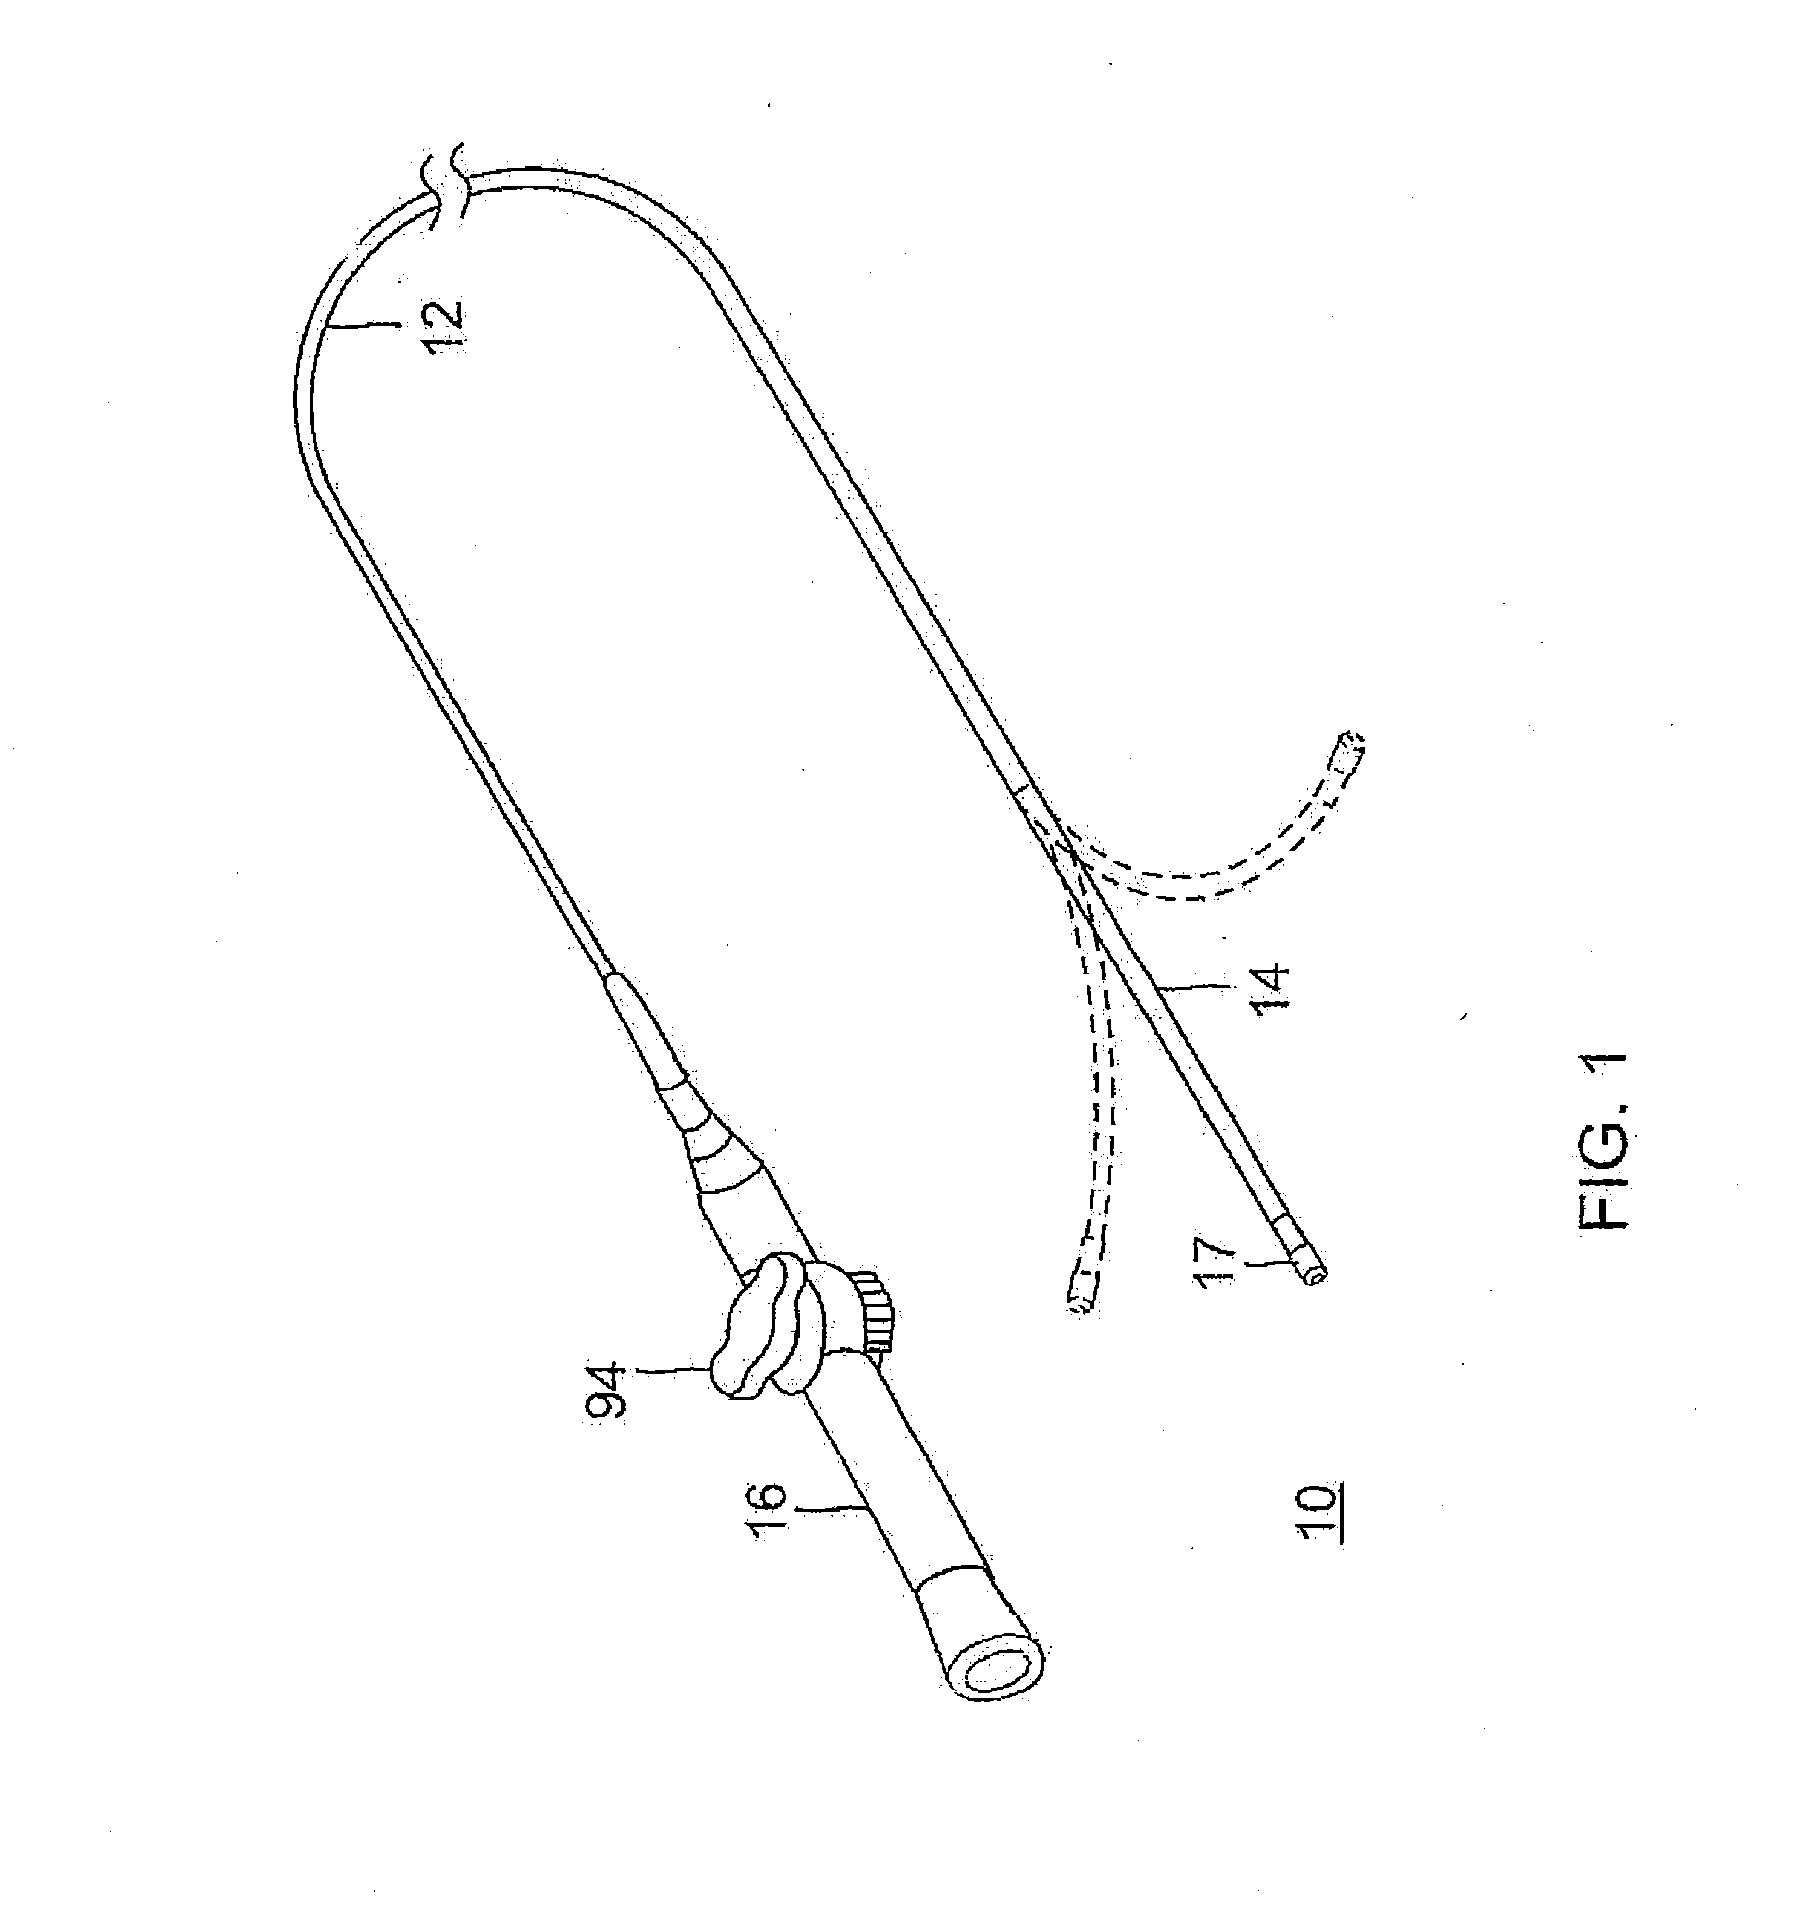 Catheter adapted for direct tissue contact and pressure sensing